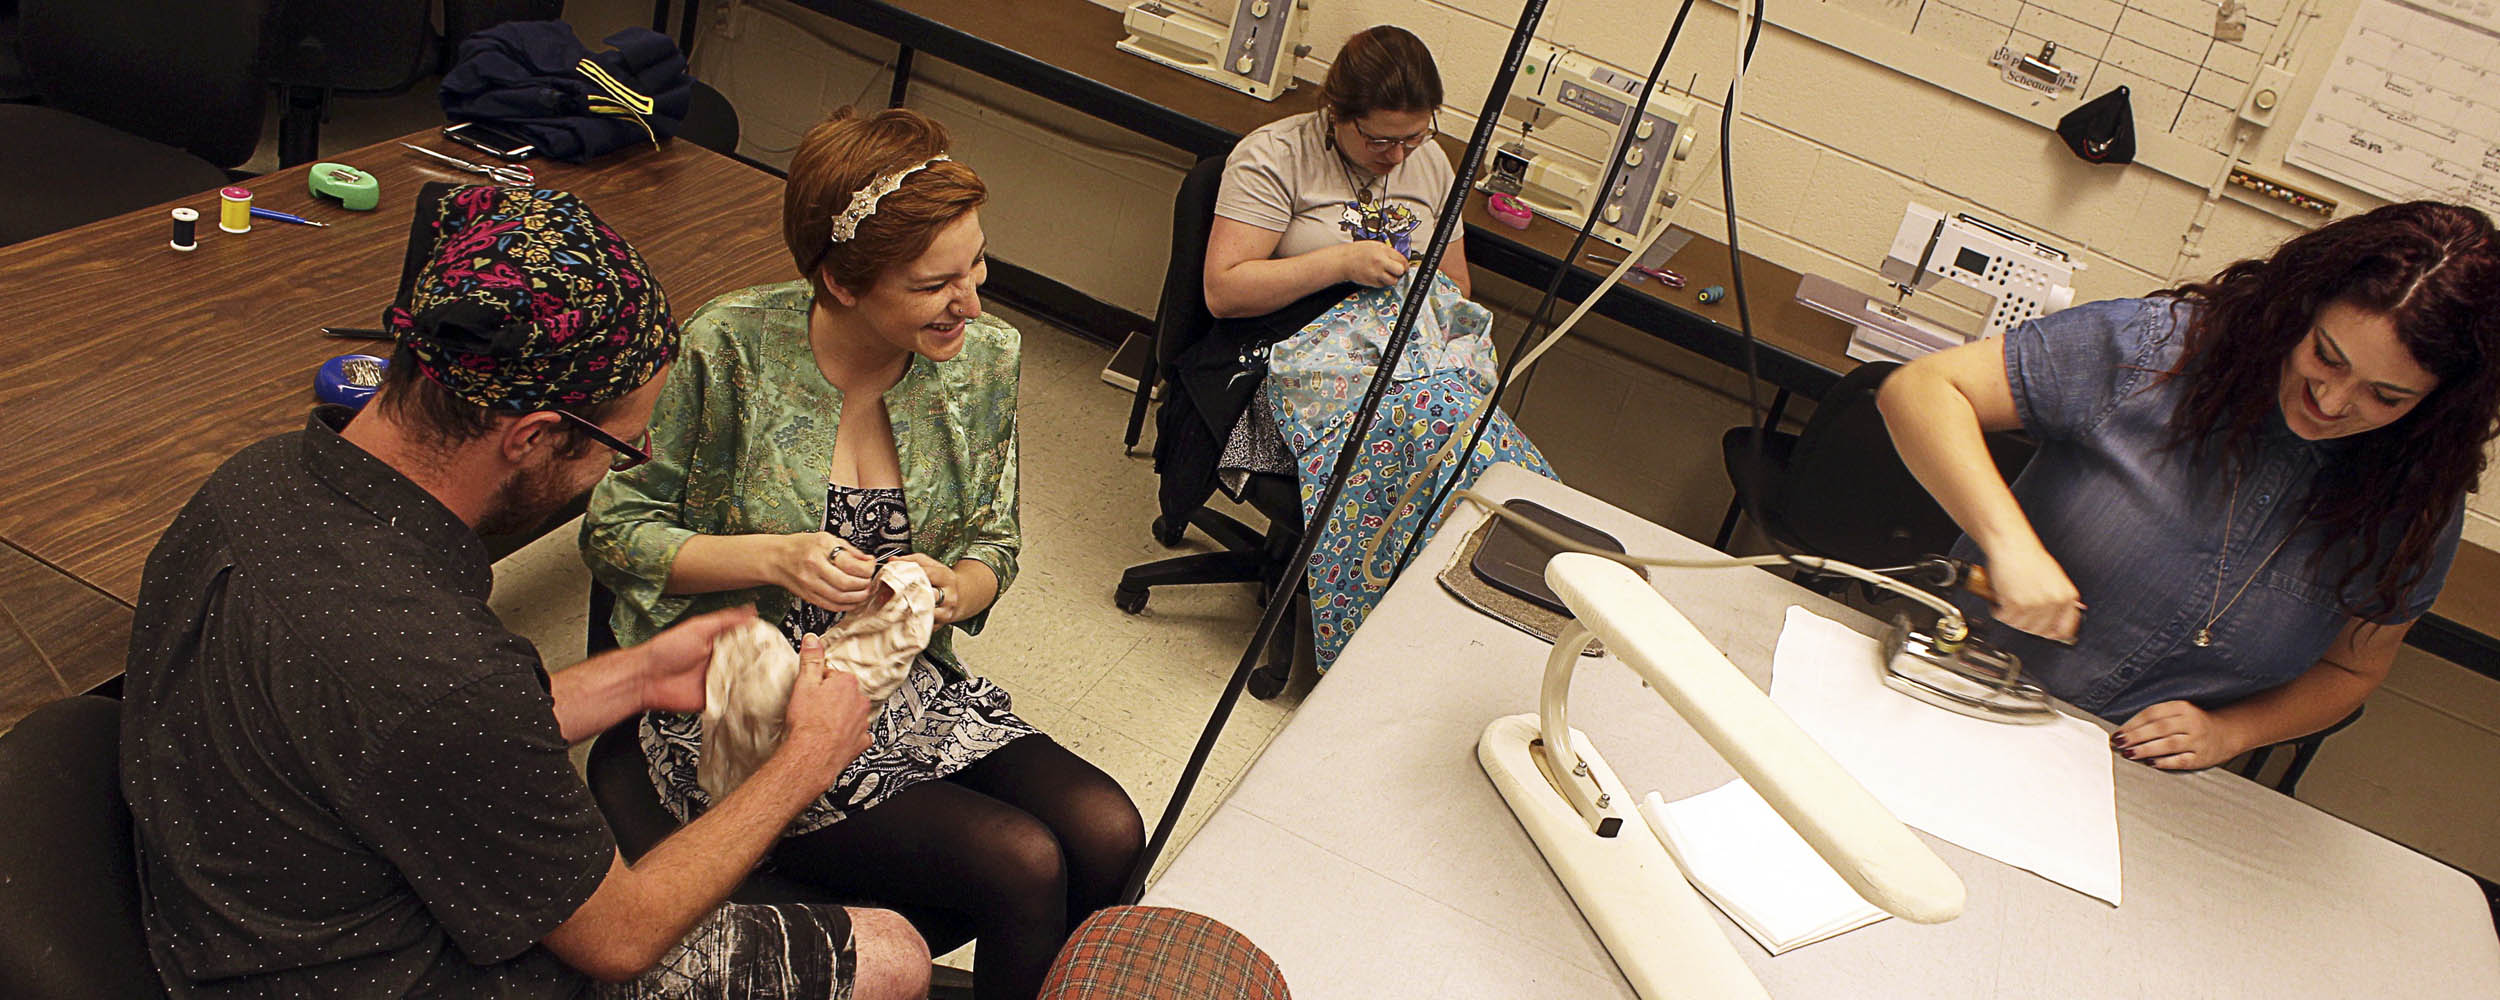 Members of the Heritage Theatre Festival’s costume shop at work: From left to right,  Joseph Musgrove,  Jessica Utz,  Caitlin Leyden, and Katie Dennis.